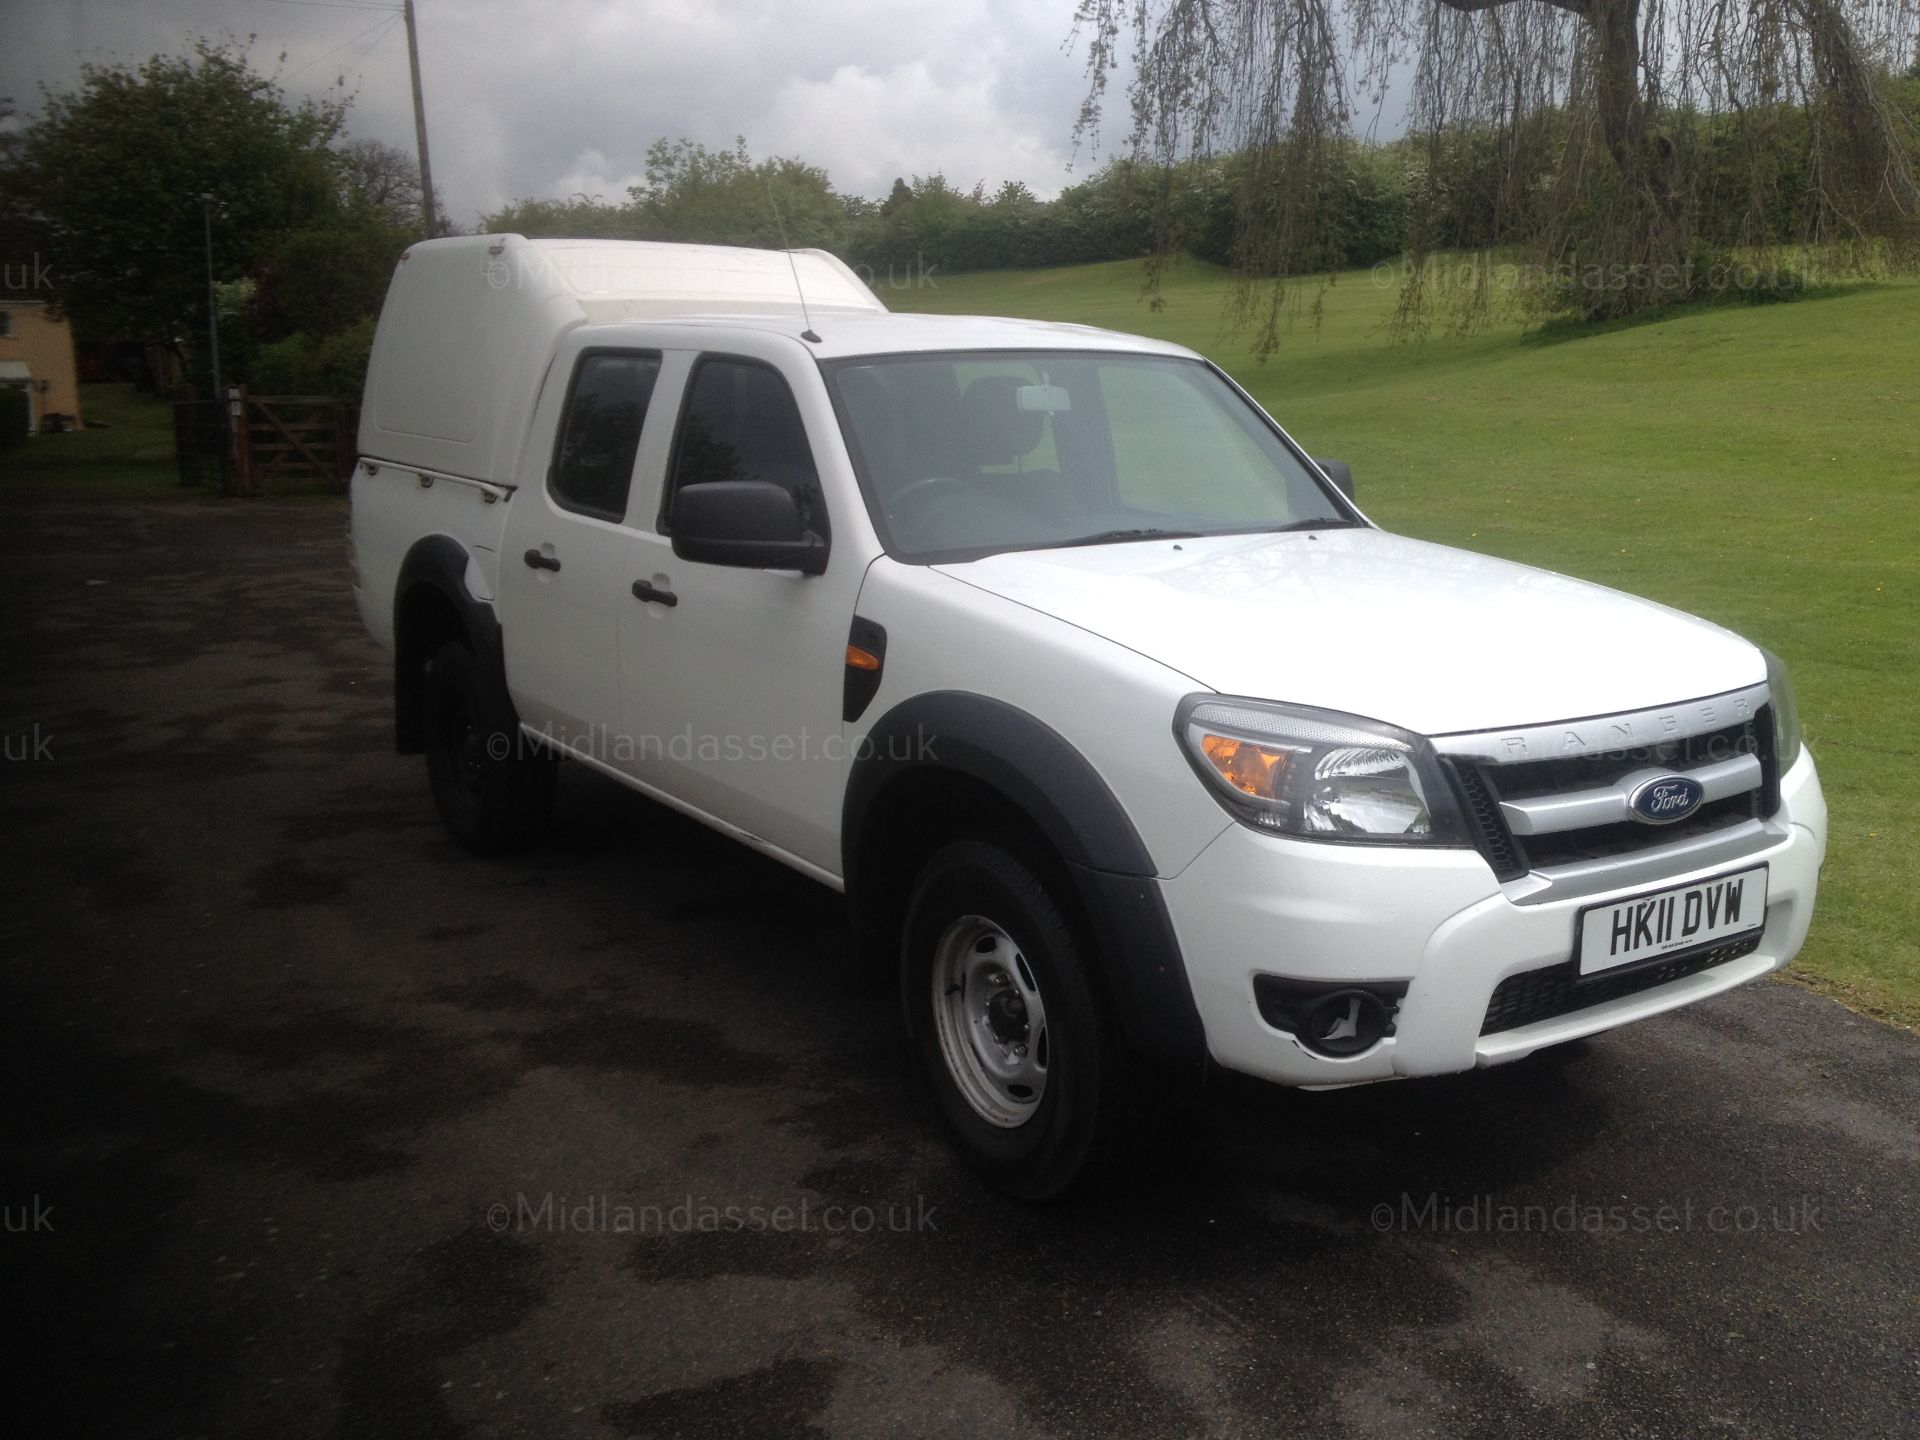 2011/11 REG FORD RANGER XL 4x4 TDCI DOUBLE CAB PICK UP ONE OWNER